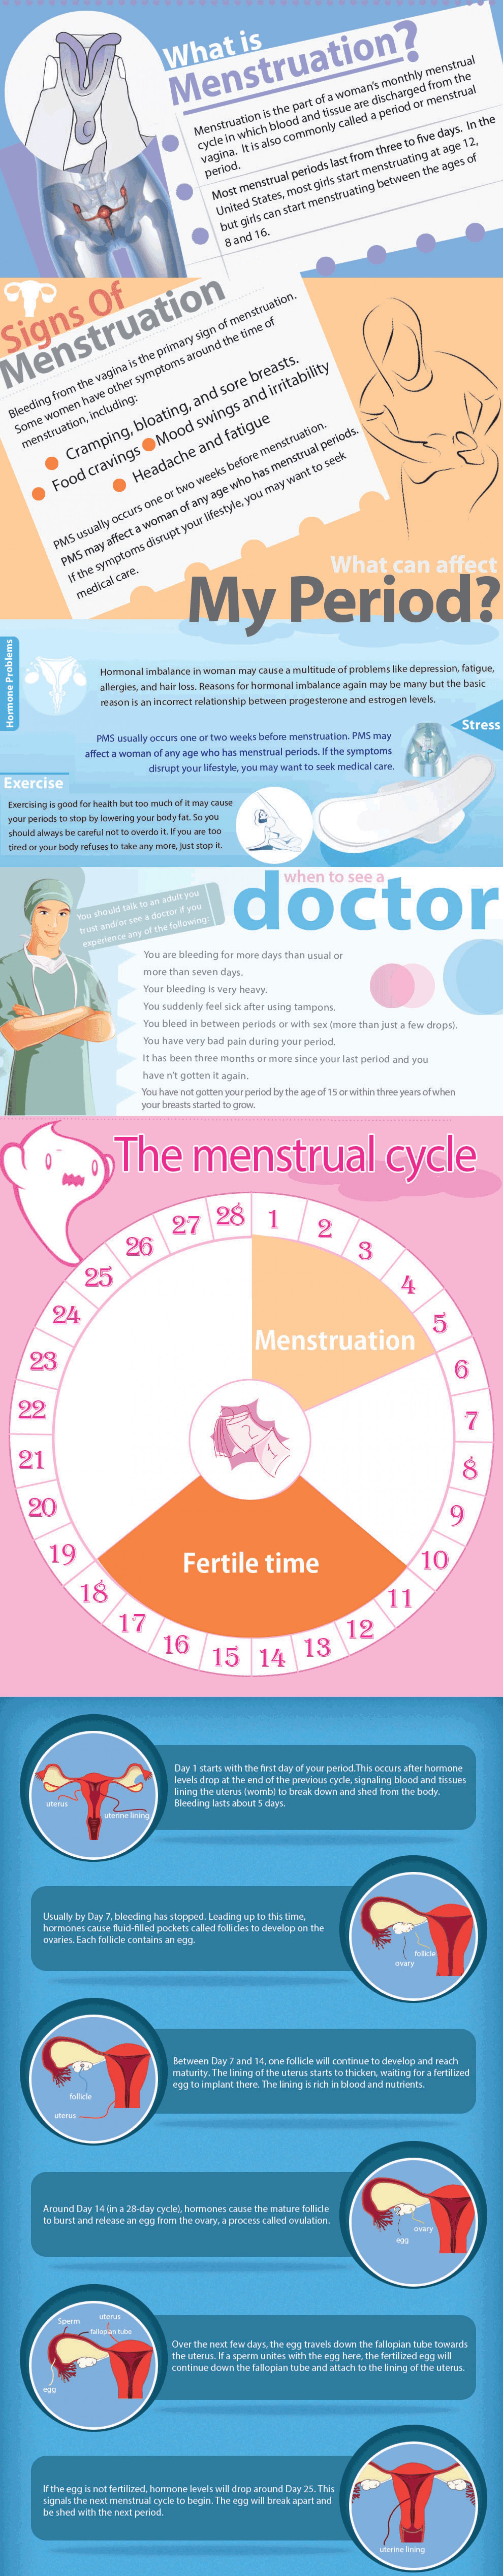 the menstrual cycle infographic